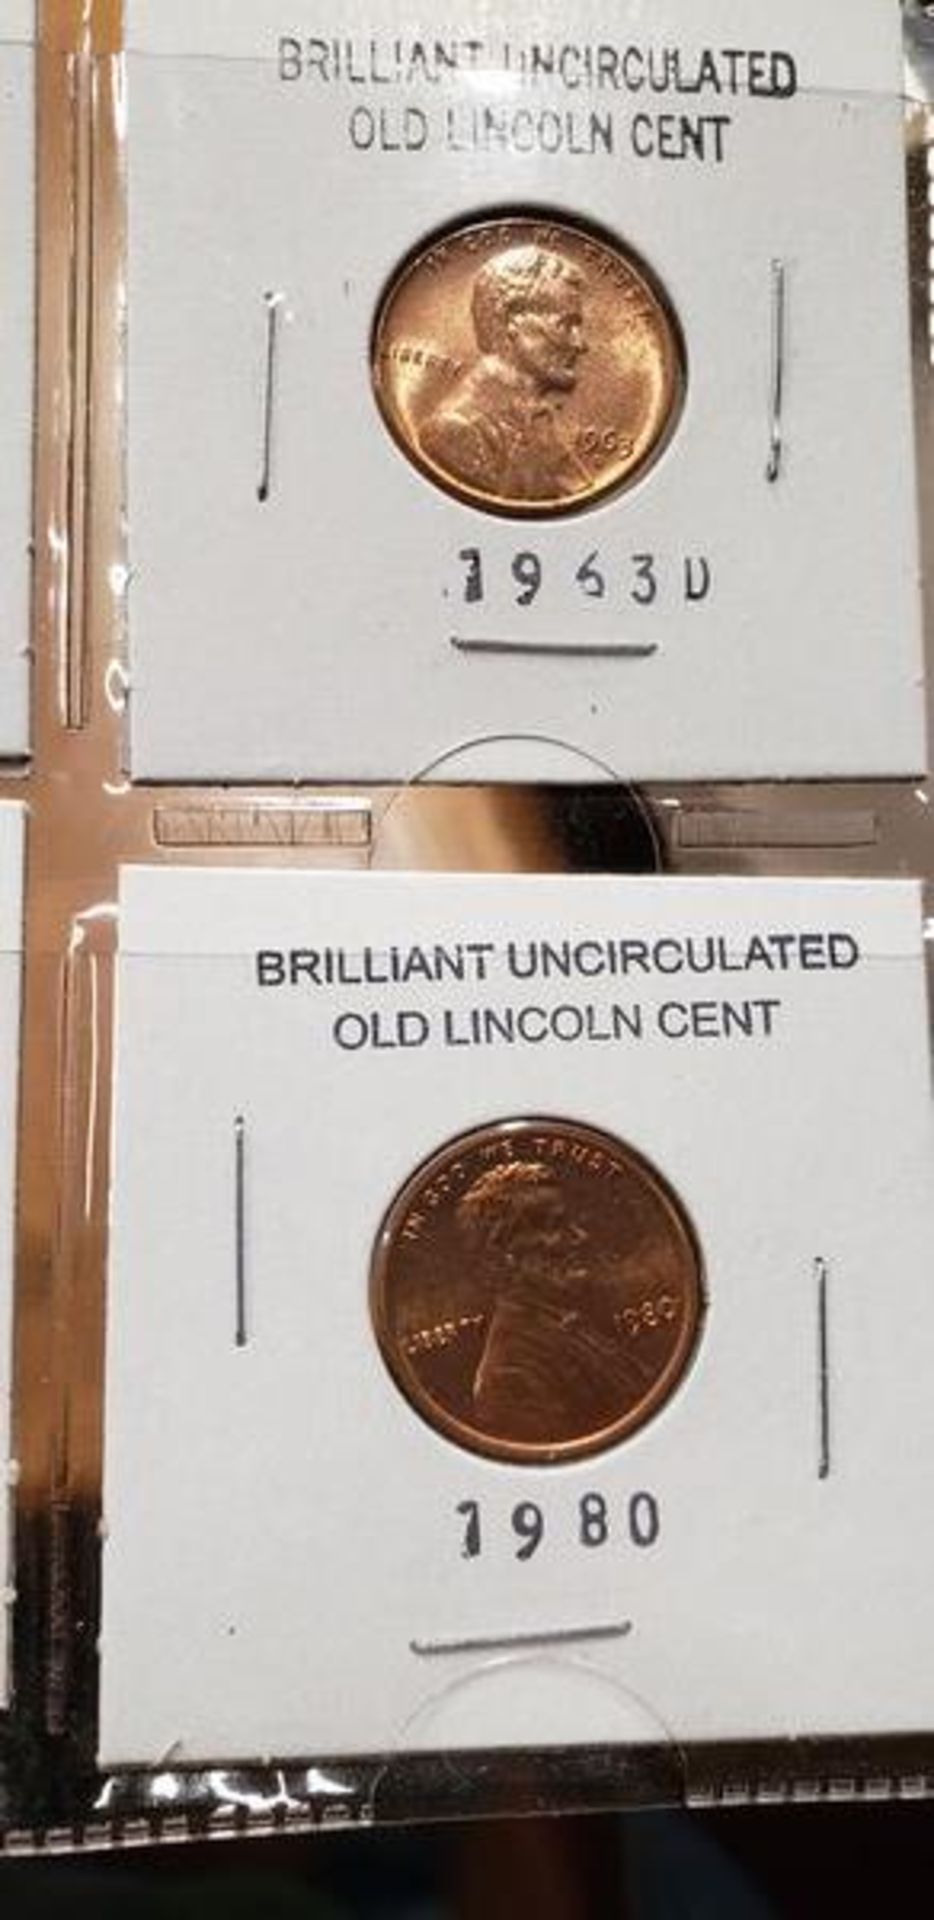 LOT OF 8 BRILLIANT UNCIRCULATED OLD LINCOLN CENTS - Image 2 of 9